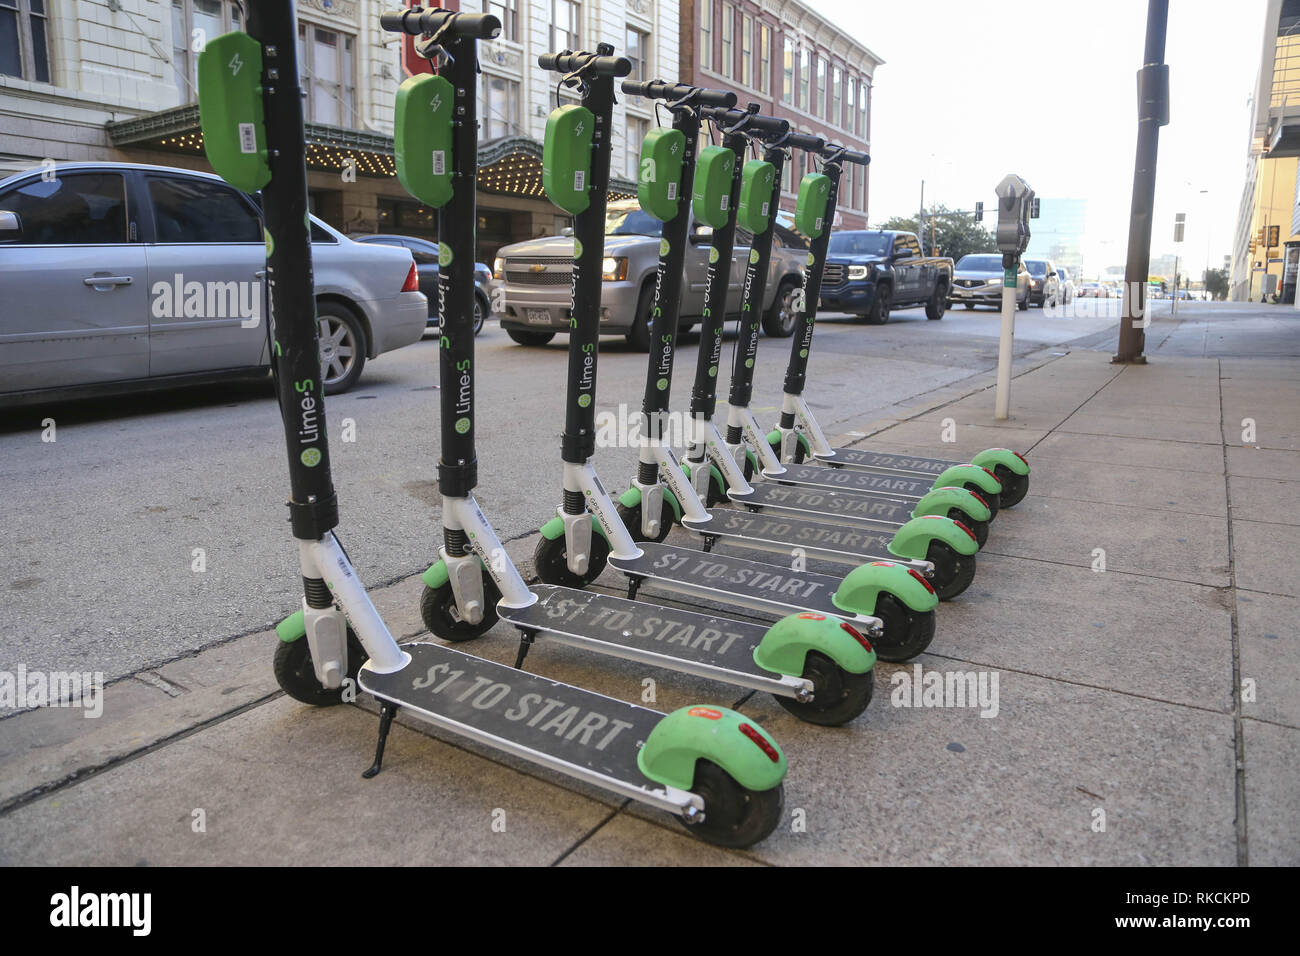 Dallas, Texas, USA. 16th Nov, 2018. Electric scooters stand along the  streets of downtown Dallas, Texas. The public scooters are available to  rent as a means of transportation throughout the city. Credit: